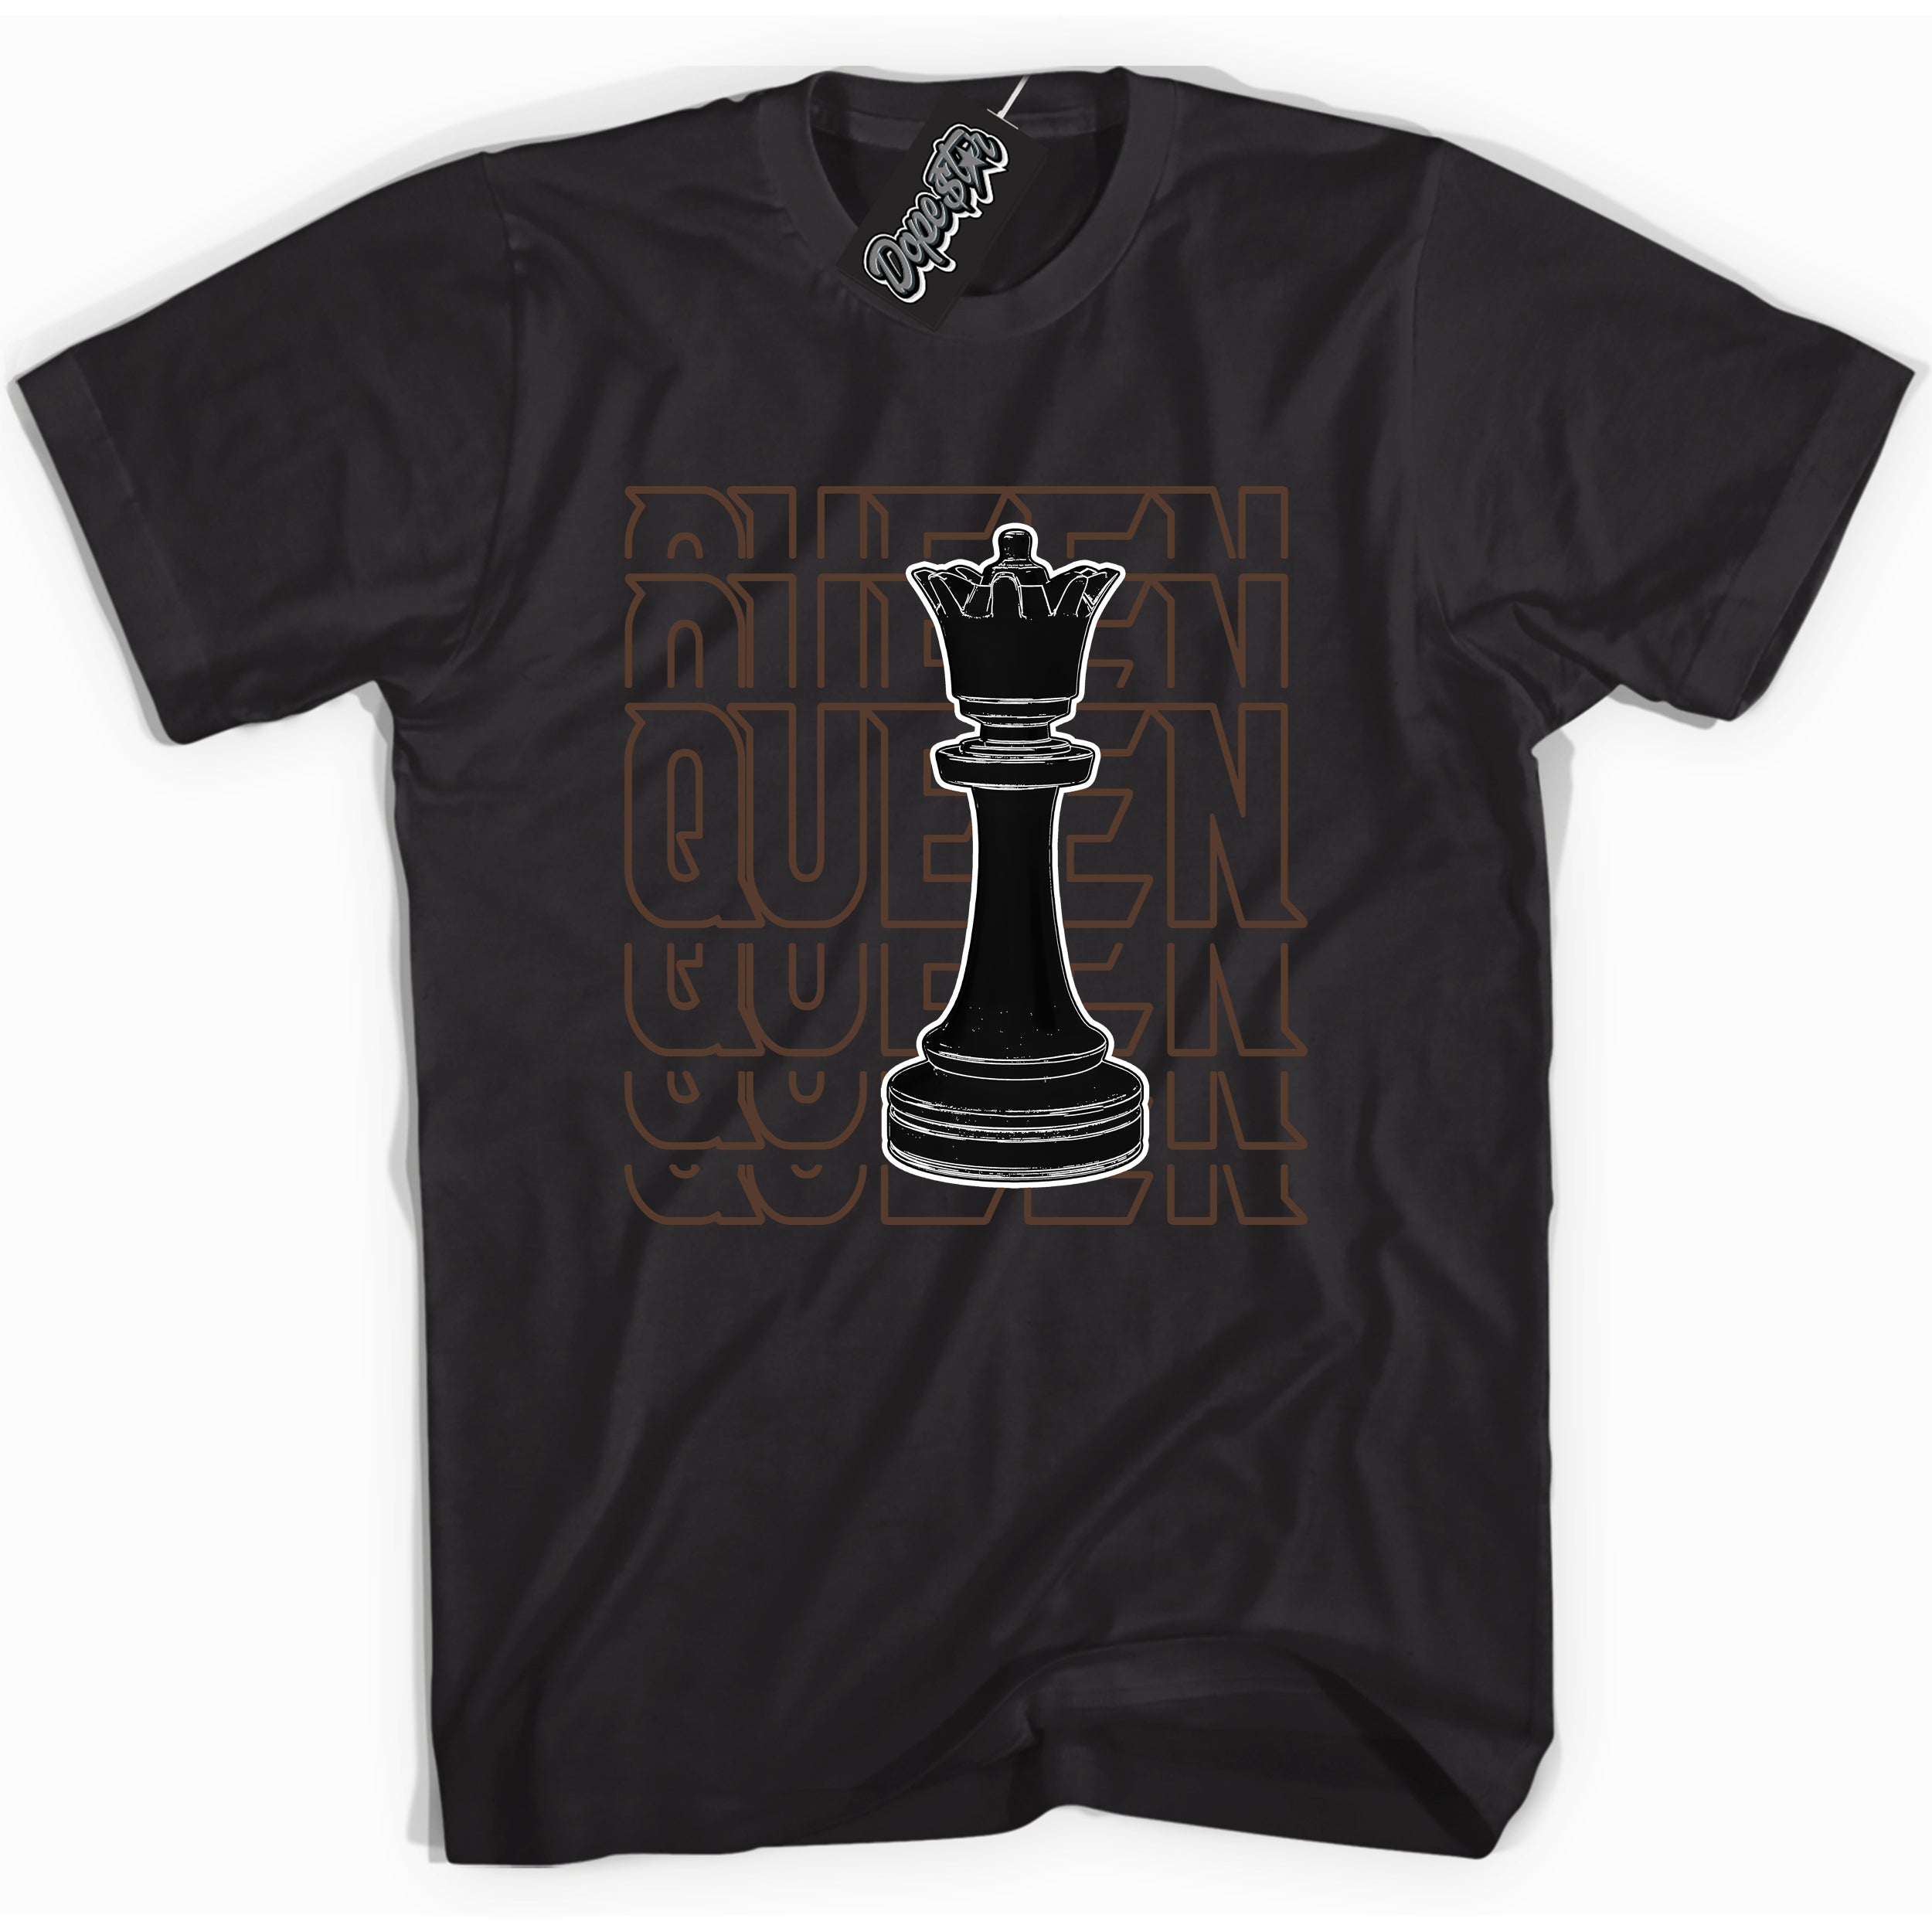 Cool Black graphic tee with “ Queen Chess ” design, that perfectly matches Palomino 1s sneakers 